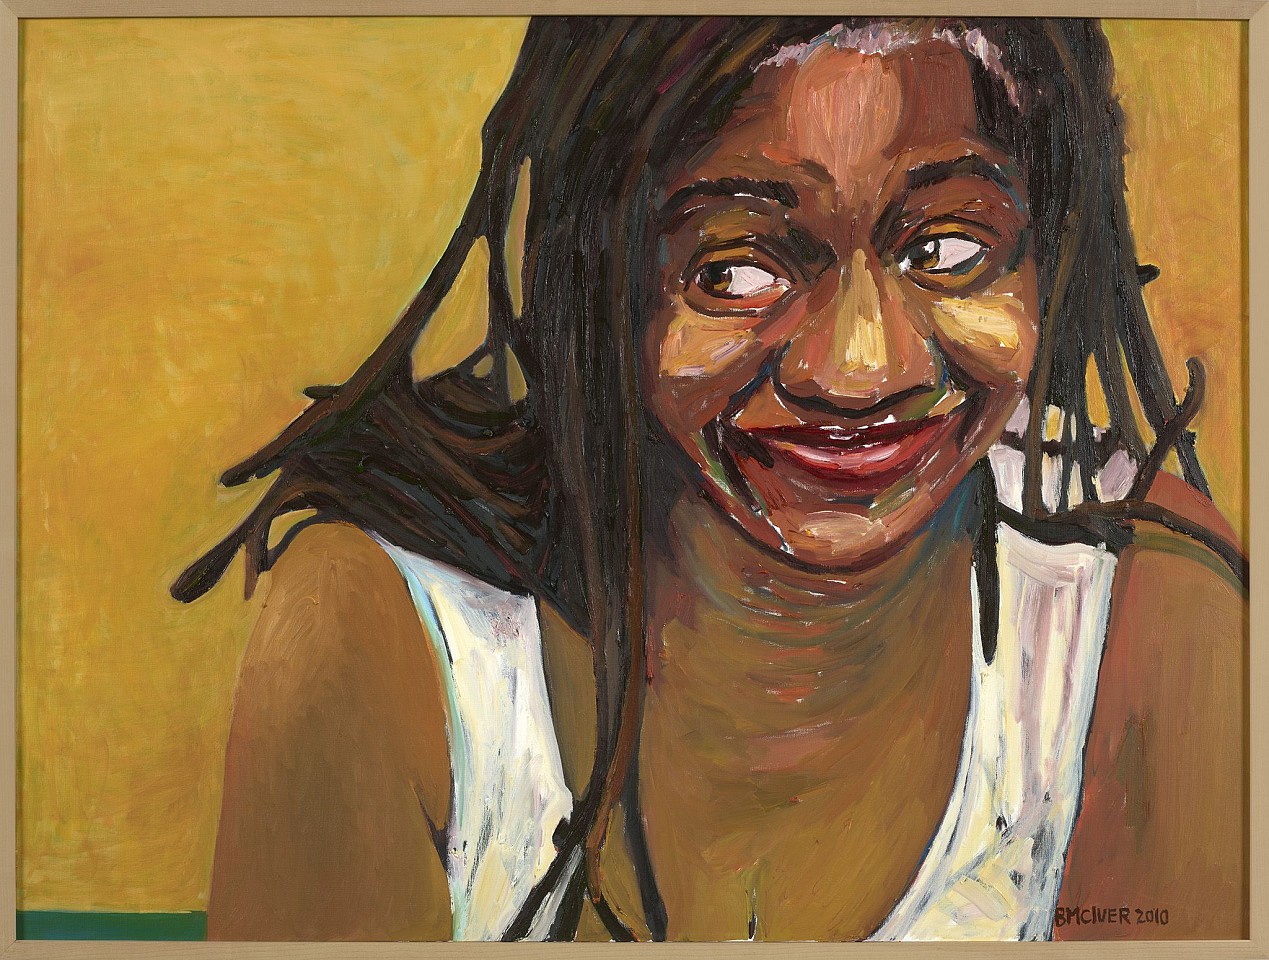 Beverly McIver, Happy Times, 2010
Oil on linen, 36 x 48 in. (91.4 x 121.9 cm)
MCI-00047